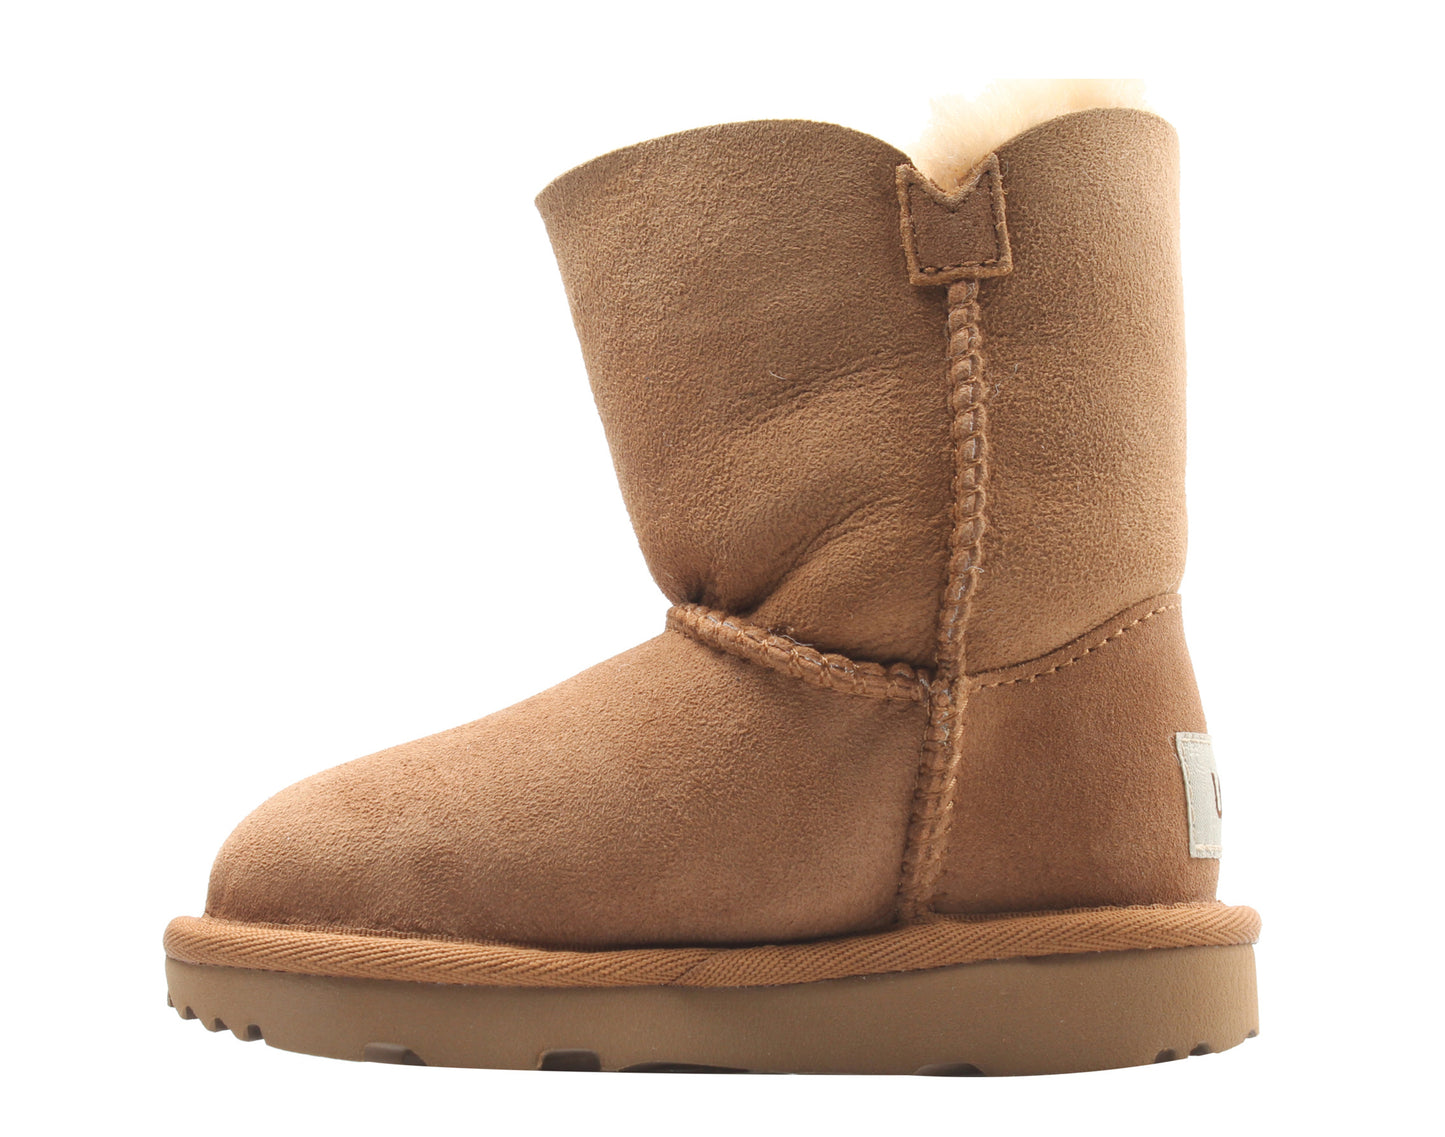 UGG Australia Bailey Button II Chestnut Toddlers Boots 1017400T-CHE